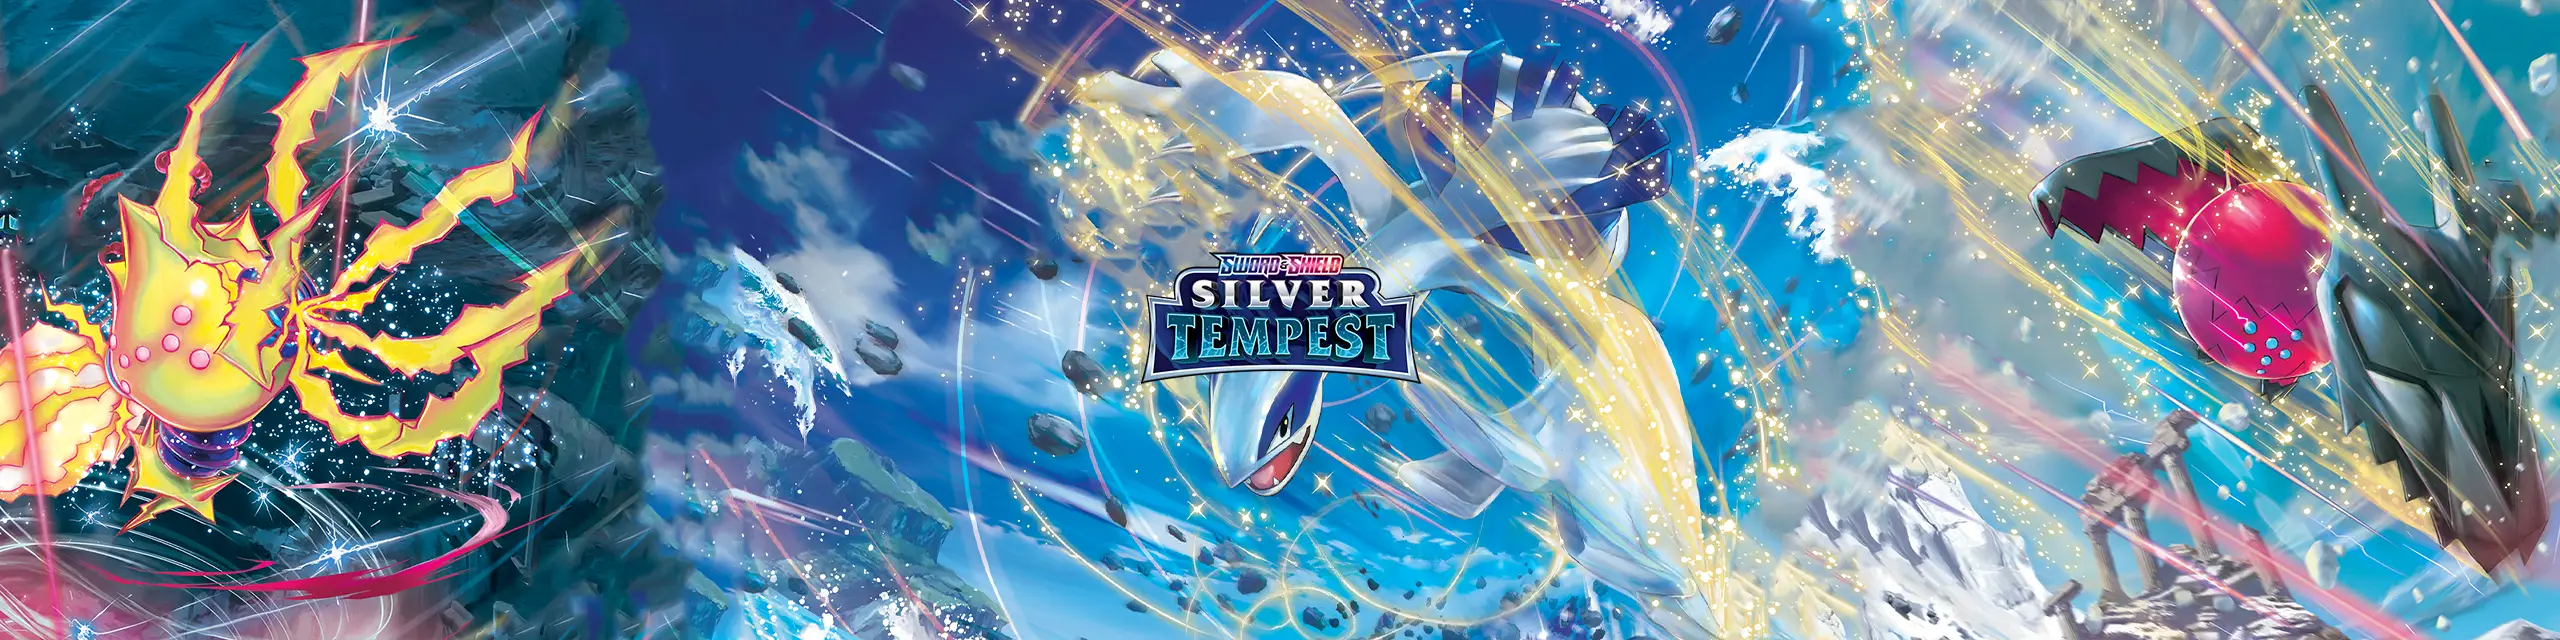 Silver tempest banner